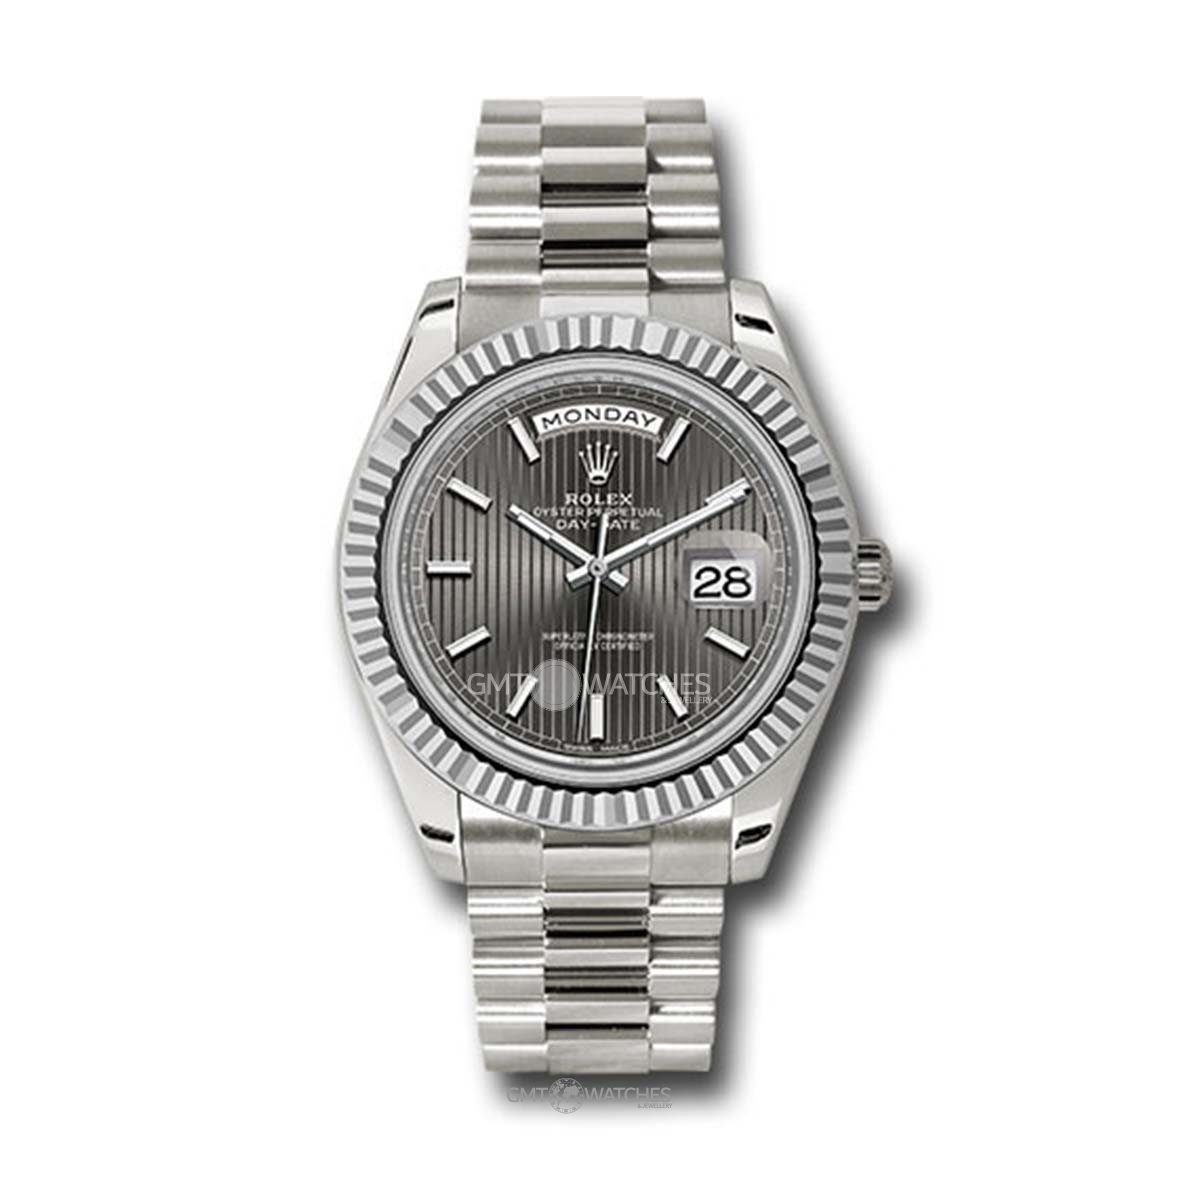 Rolex Oyster Perpetual Day-Date 40mm 18k White Gold 228239 rsmip